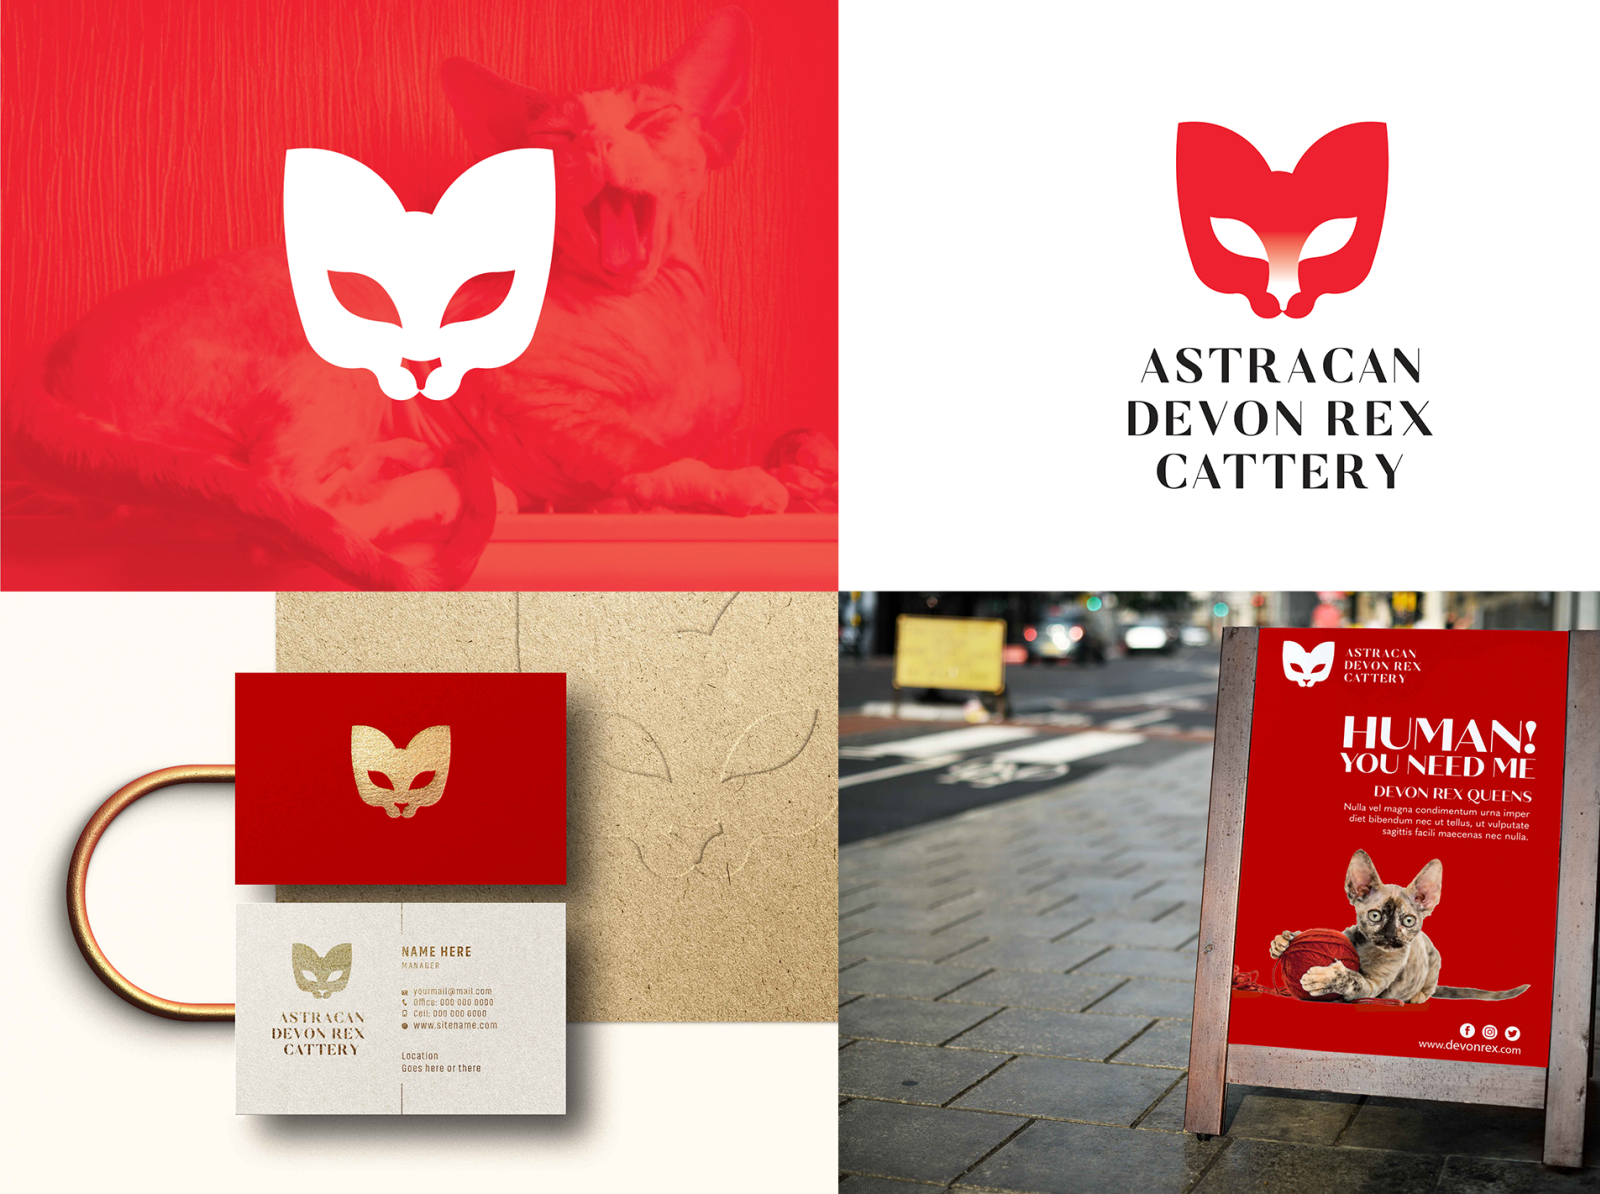 astracan-devon-rex-cattery-logo-by-hanna-on-dribbble